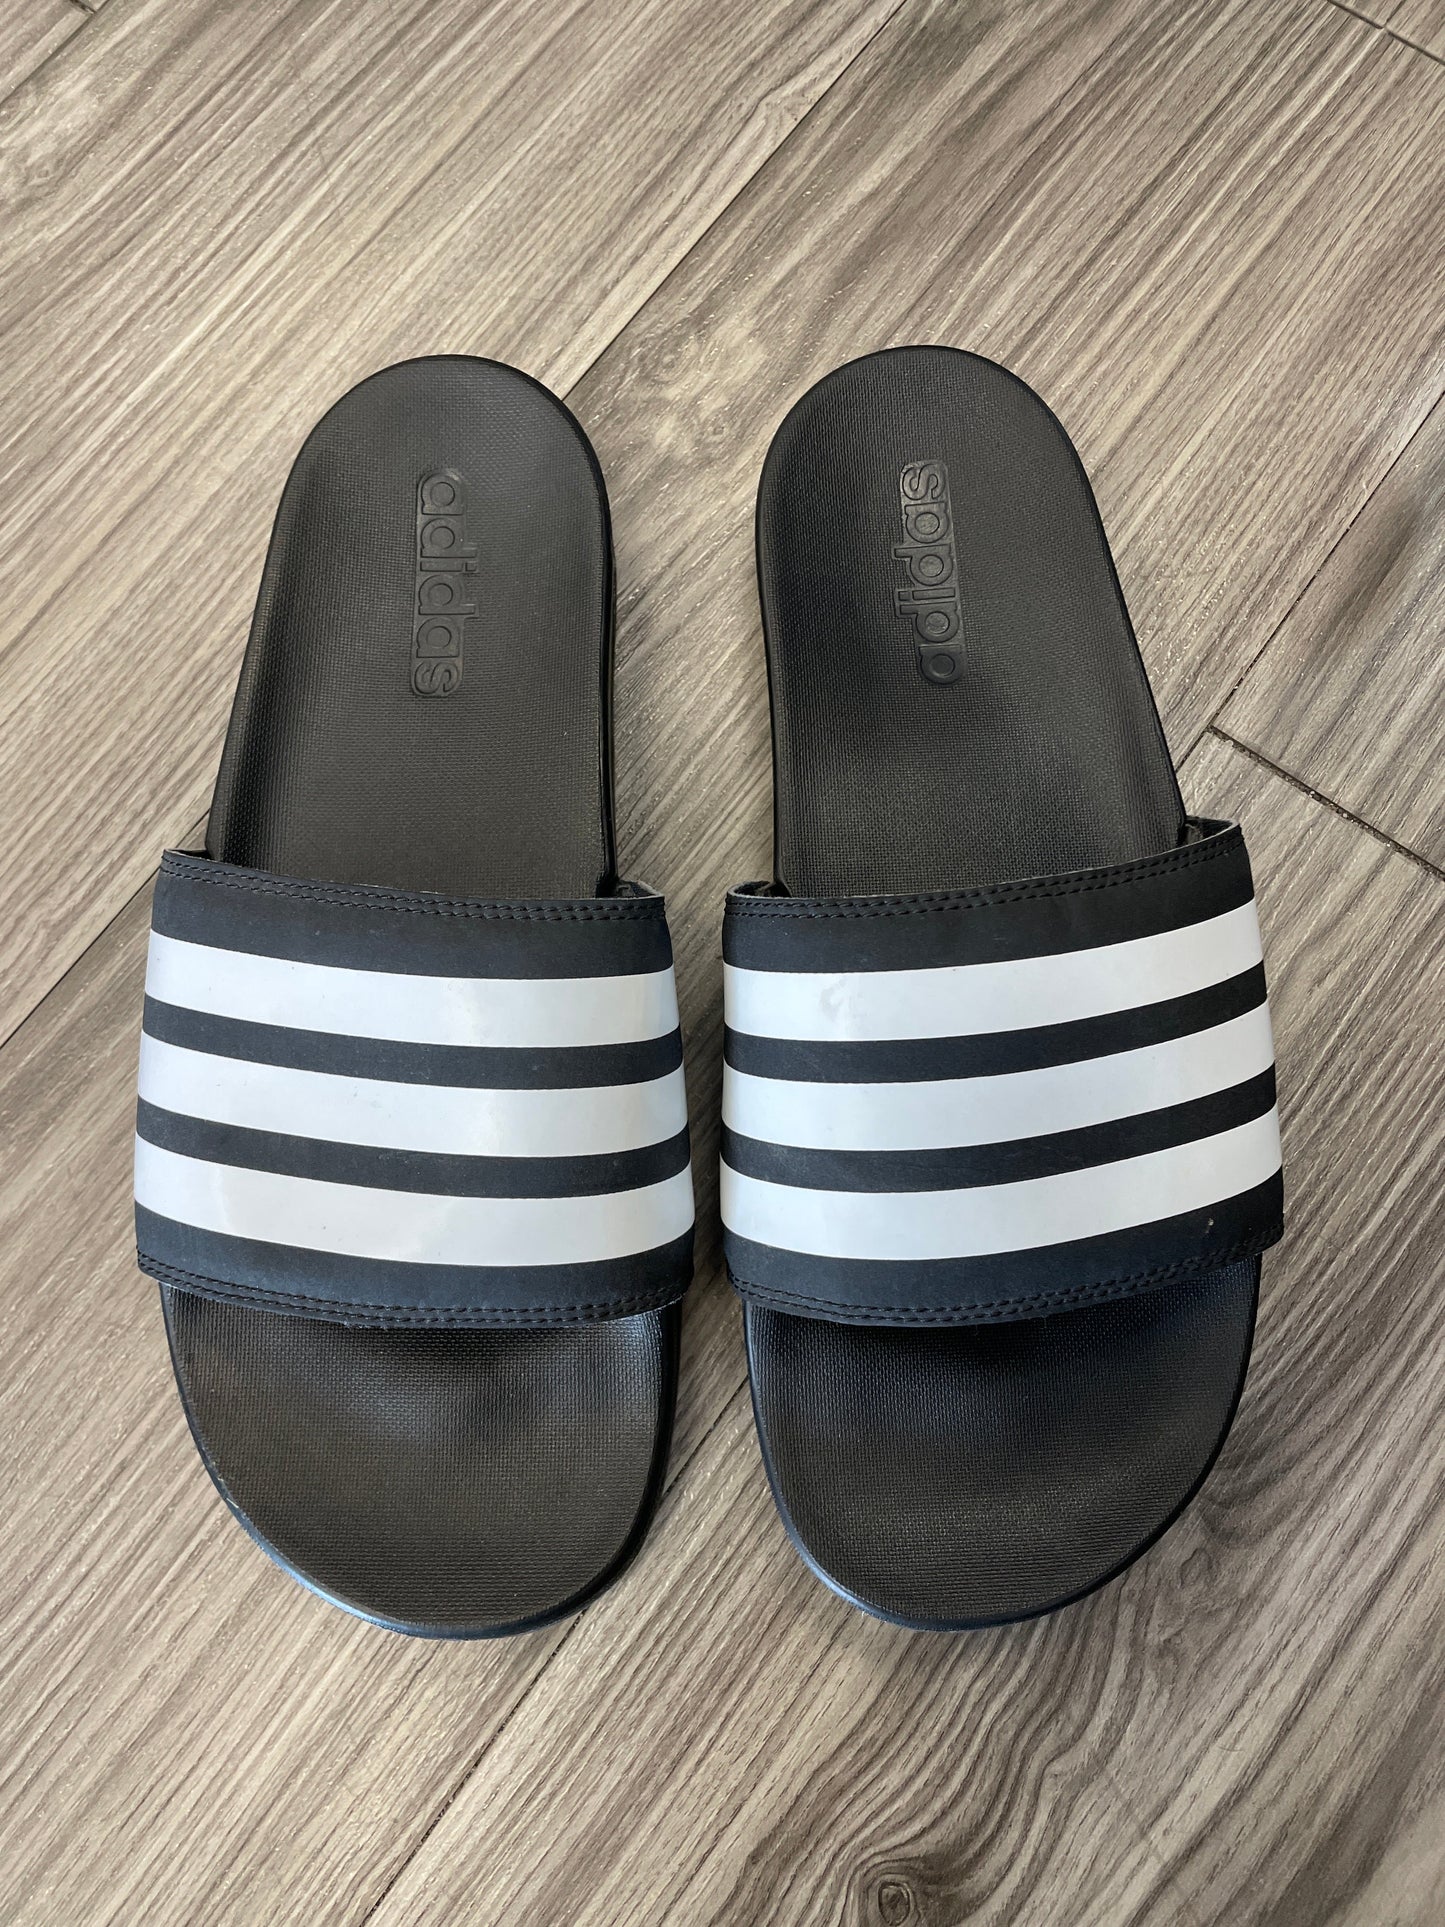 Sandals Sport By Adidas  Size: 9